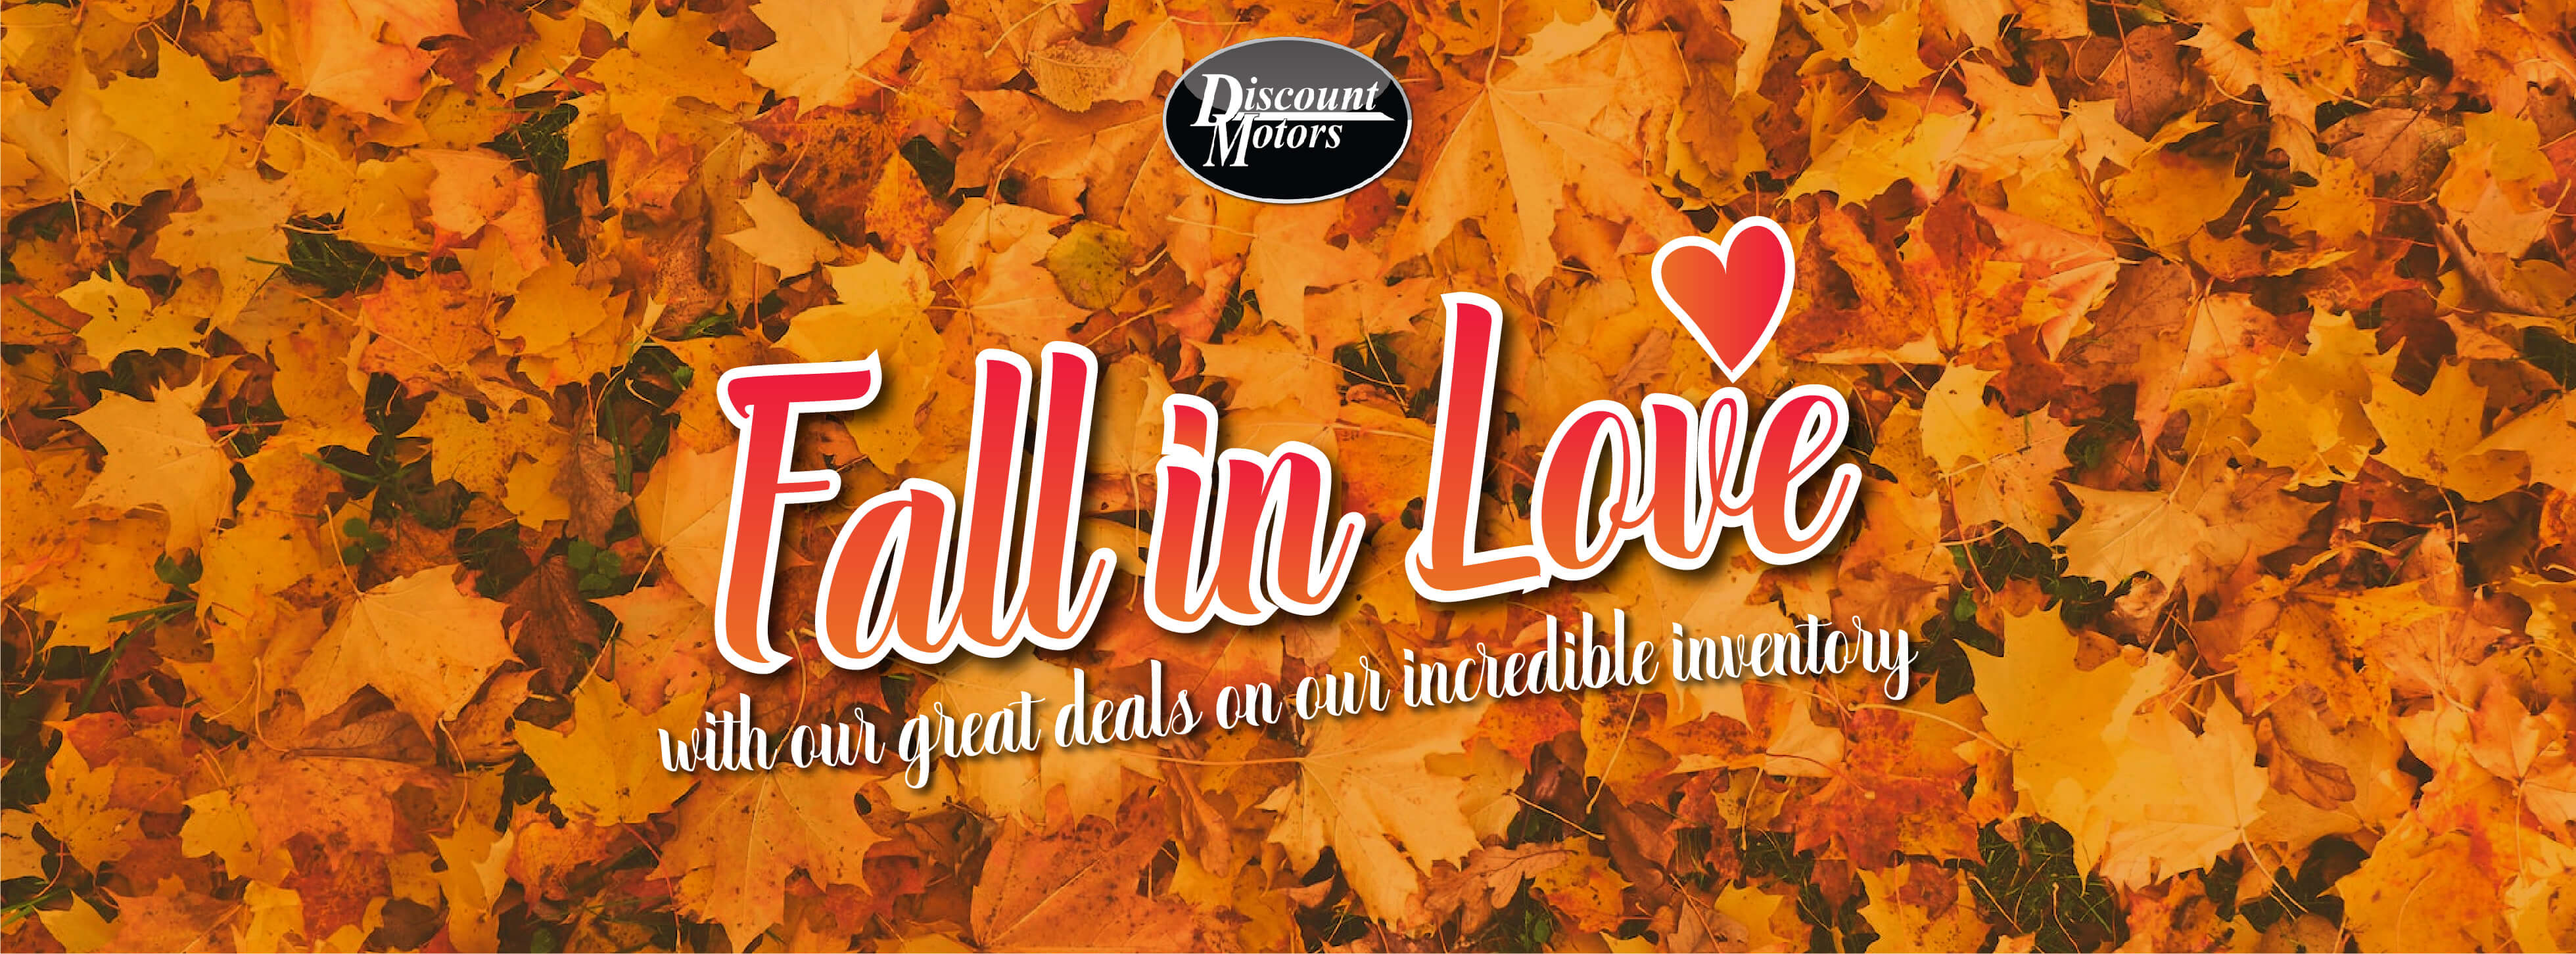 Pile of orange leaves with advertising slogans. Fall in love with our great deals.